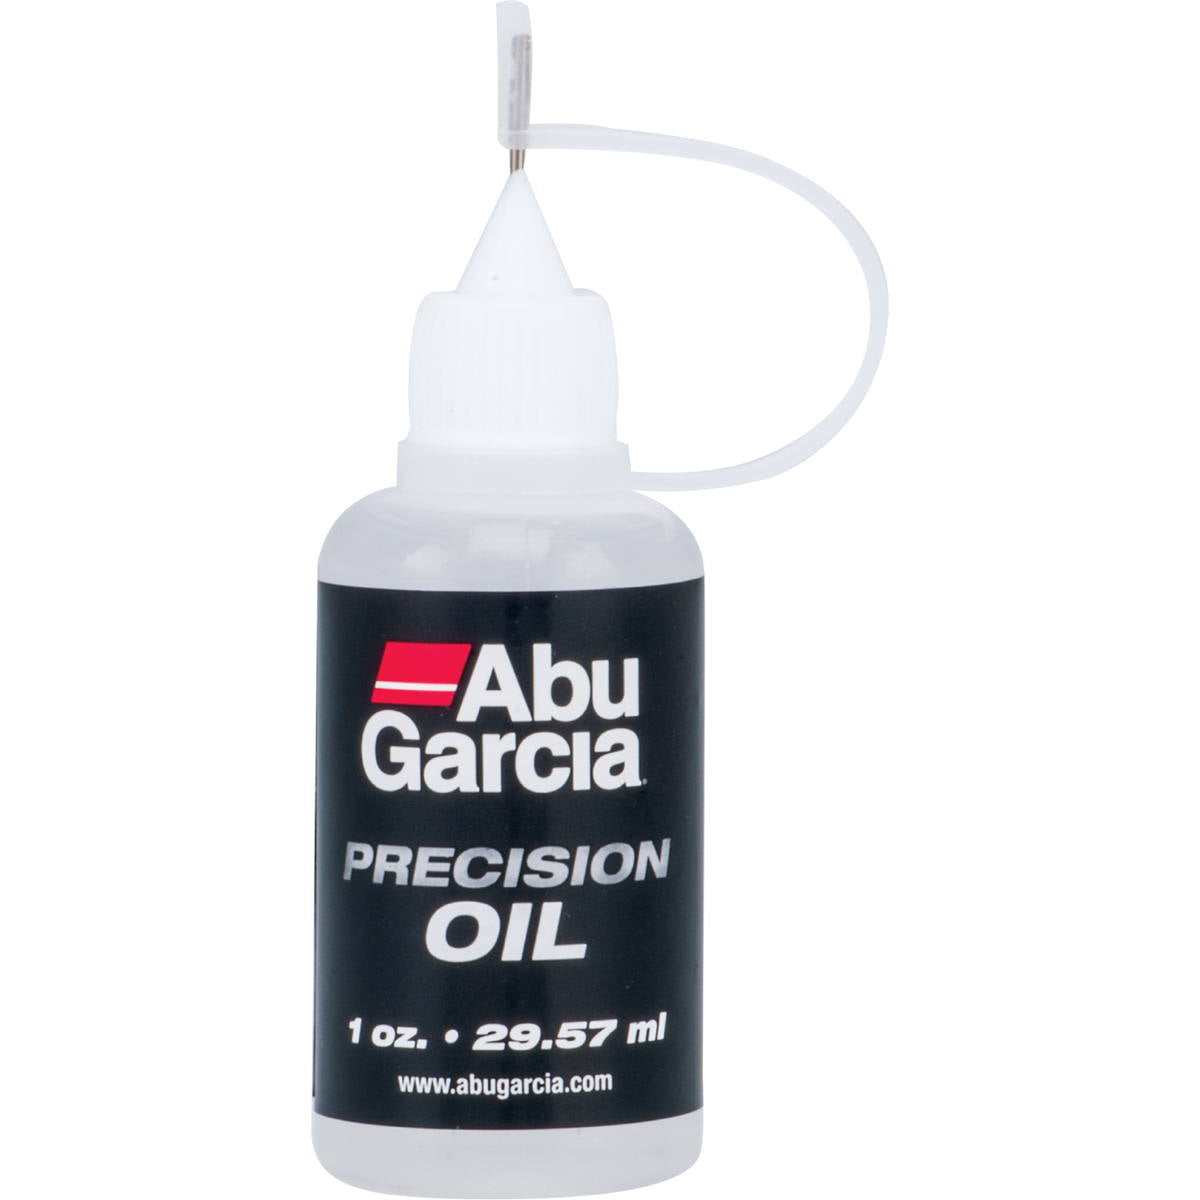 Photo of Abu Garcia Reel Oil for sale at United Tackle Shops.